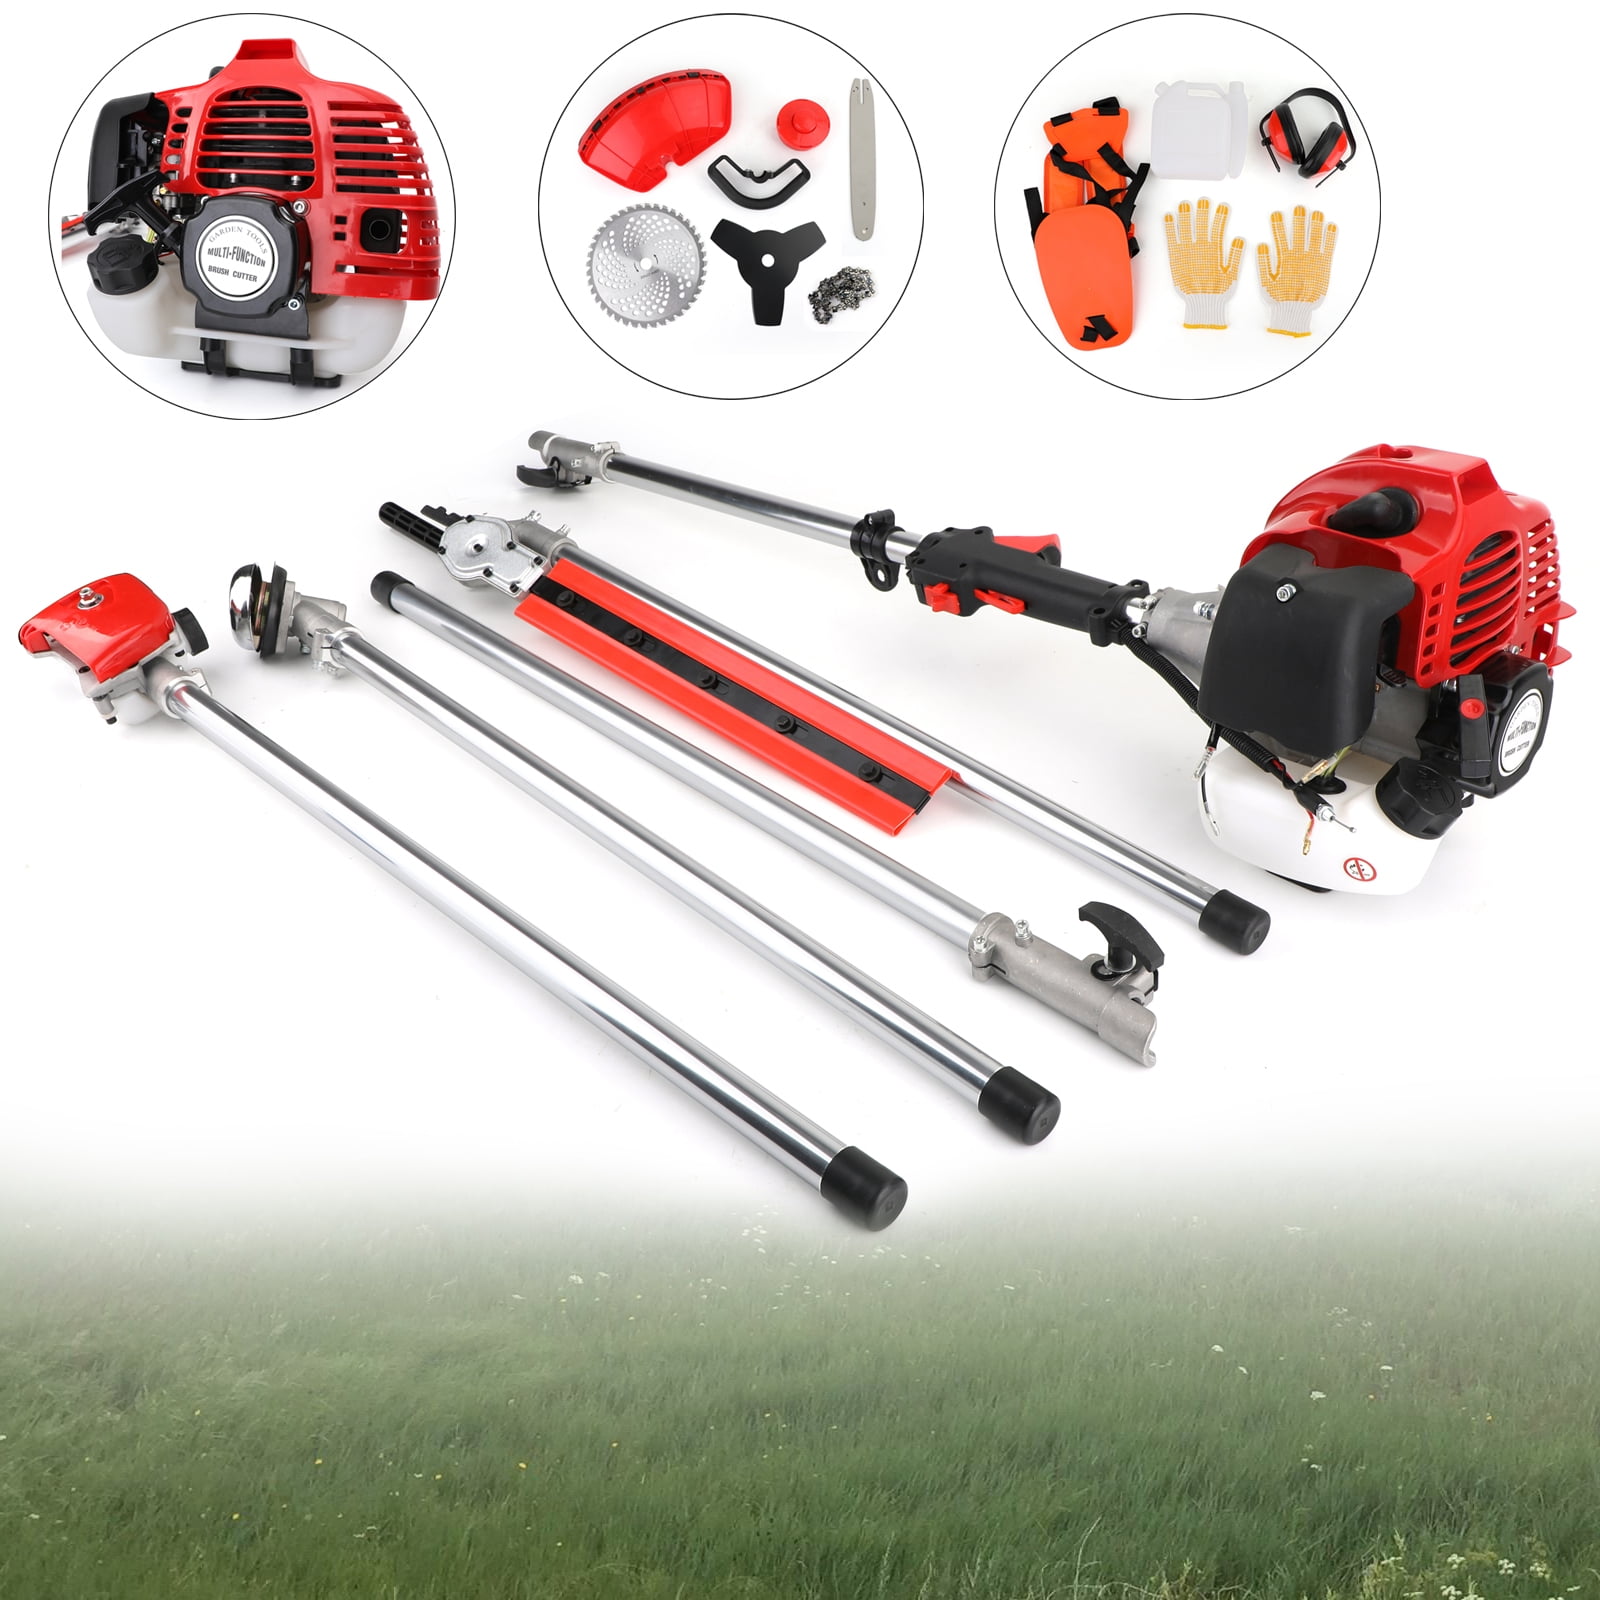 Brush Cutter Iglobalbuy 52CC Gas Multi-Functional 5 in 1 Pole Hedge Trimmer Trimmer Pole Chainsaw Pruner & 43 inch Extension Pole 